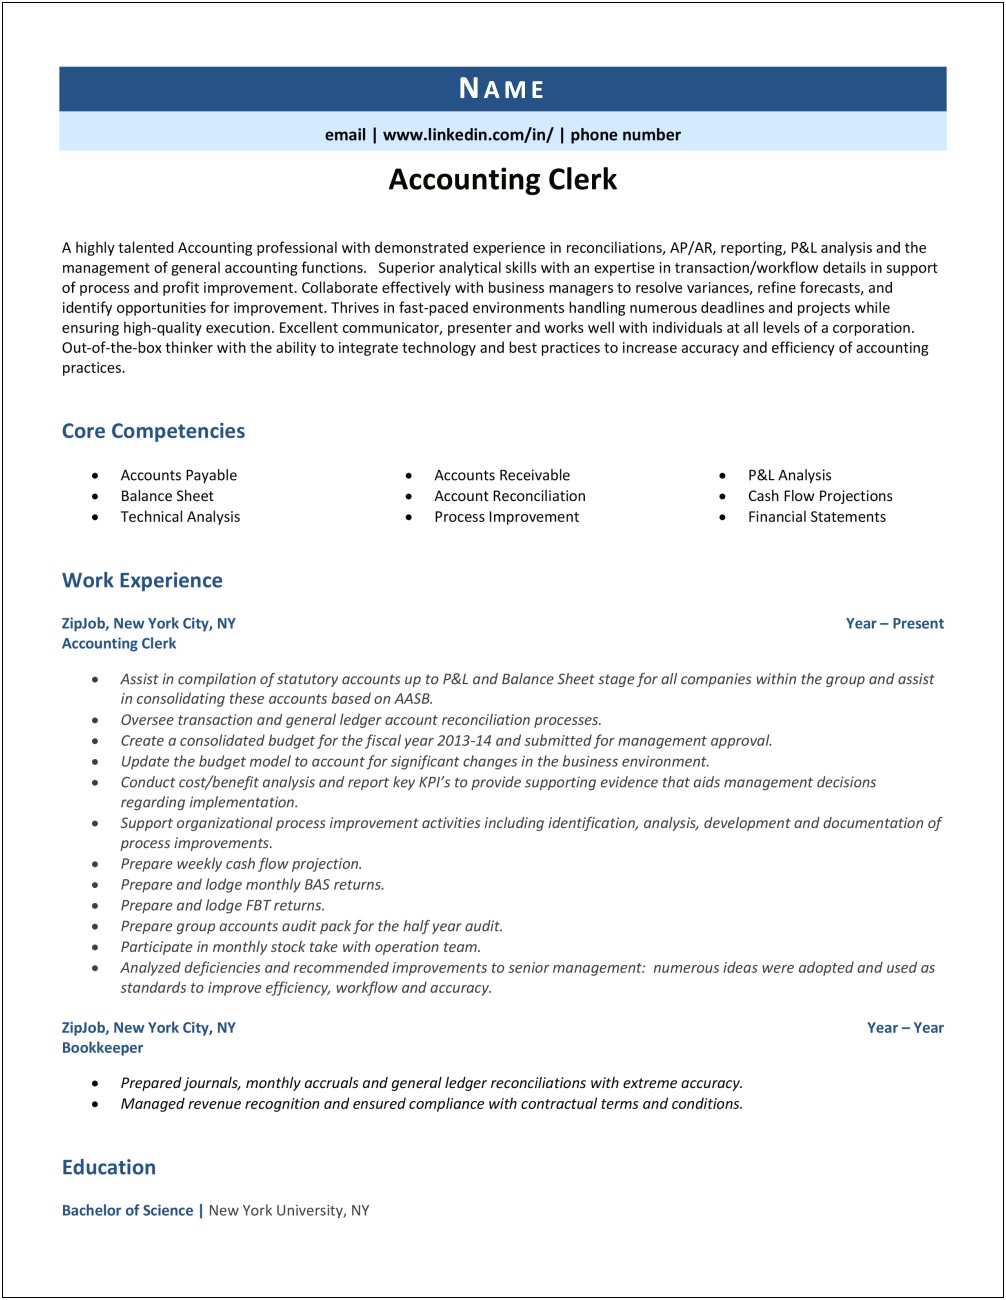 Sample Of Resume Summaryfor Accounting Clerc